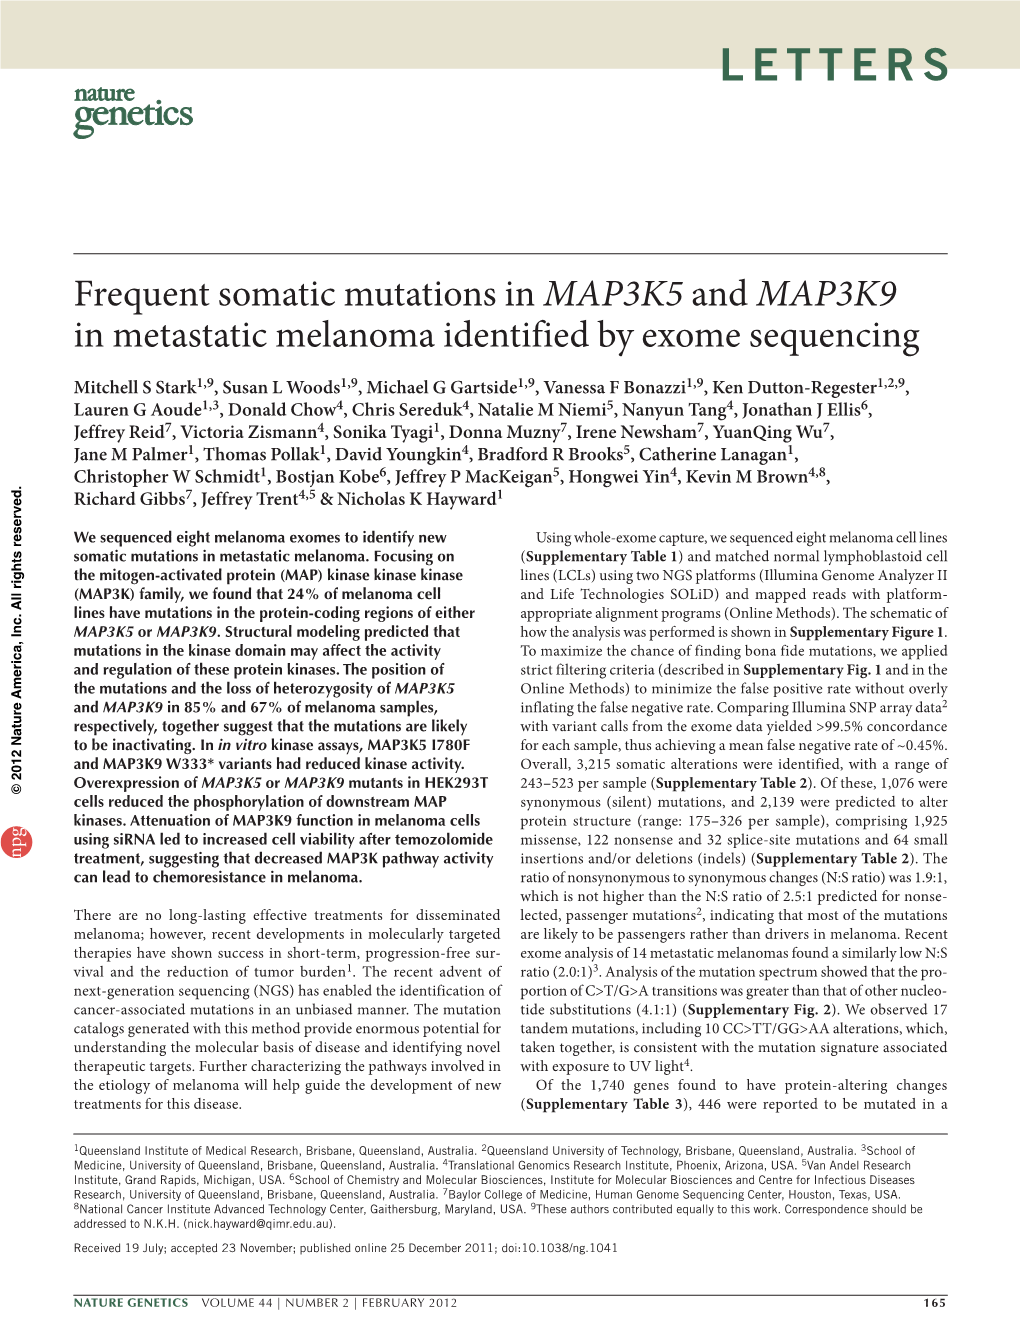 Frequent Somatic Mutations in MAP3K5 and MAP3K9 in Metastatic Melanoma Identified by Exome Sequencing